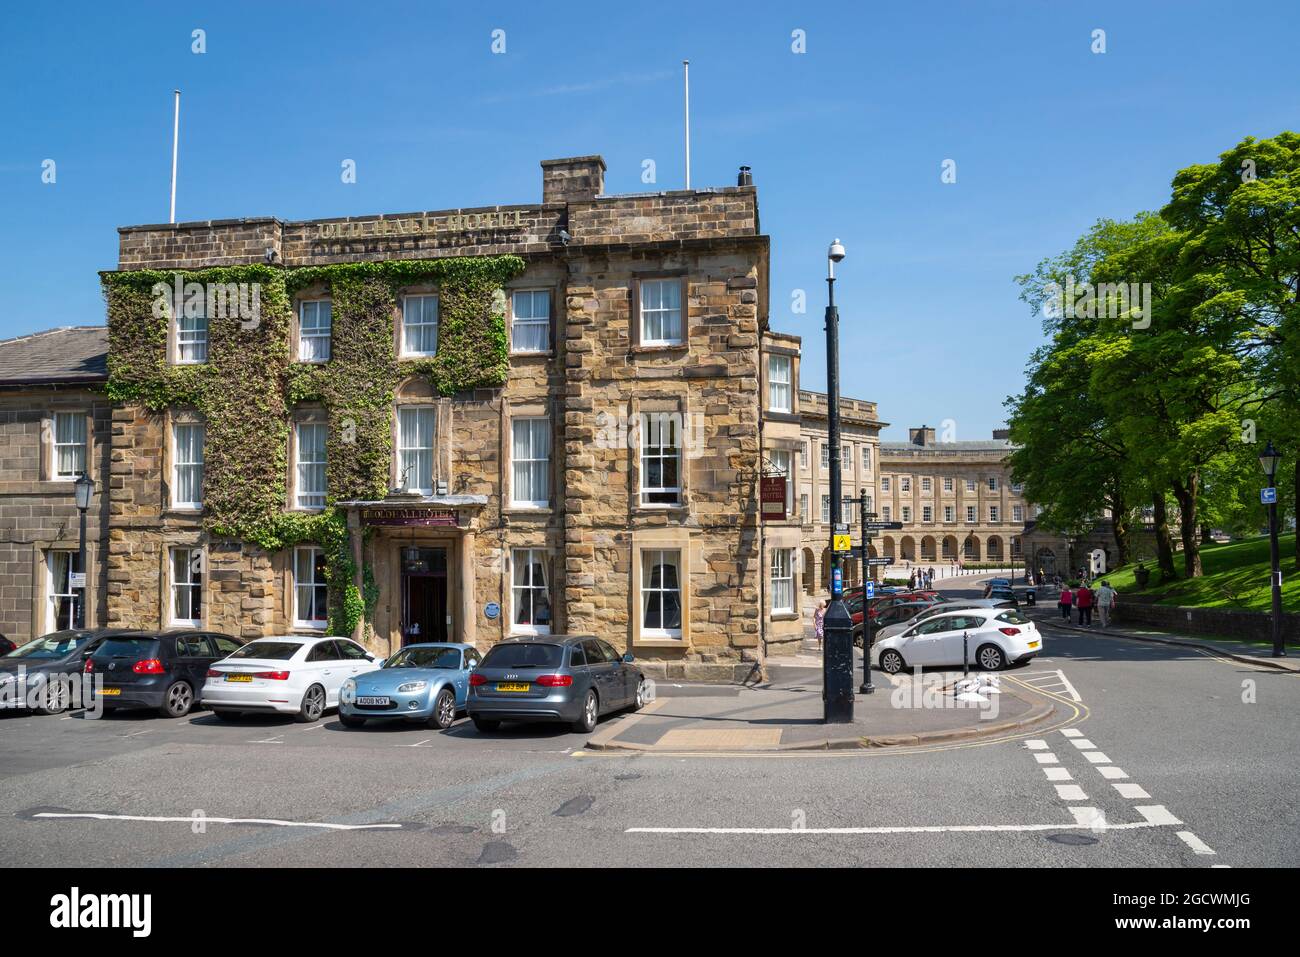 The Old Hall Hotel and Cresent, Buxton, Derbyshire, England. Stock Photo